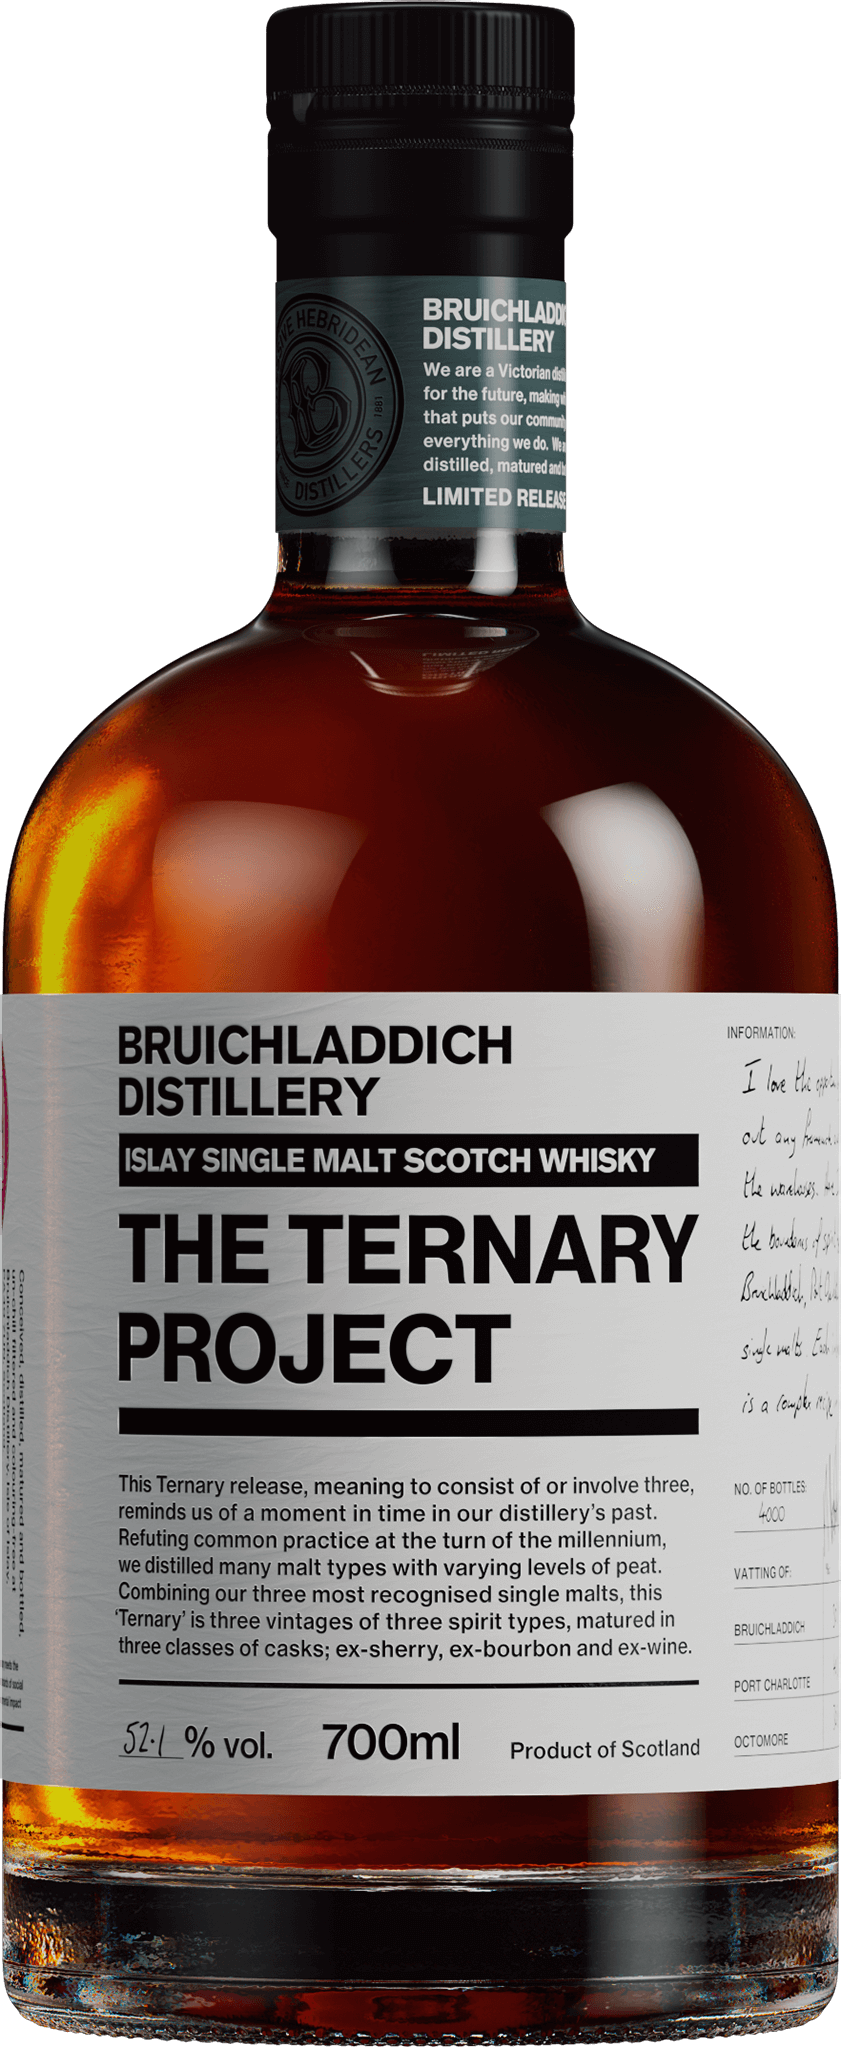 The Ternary Project